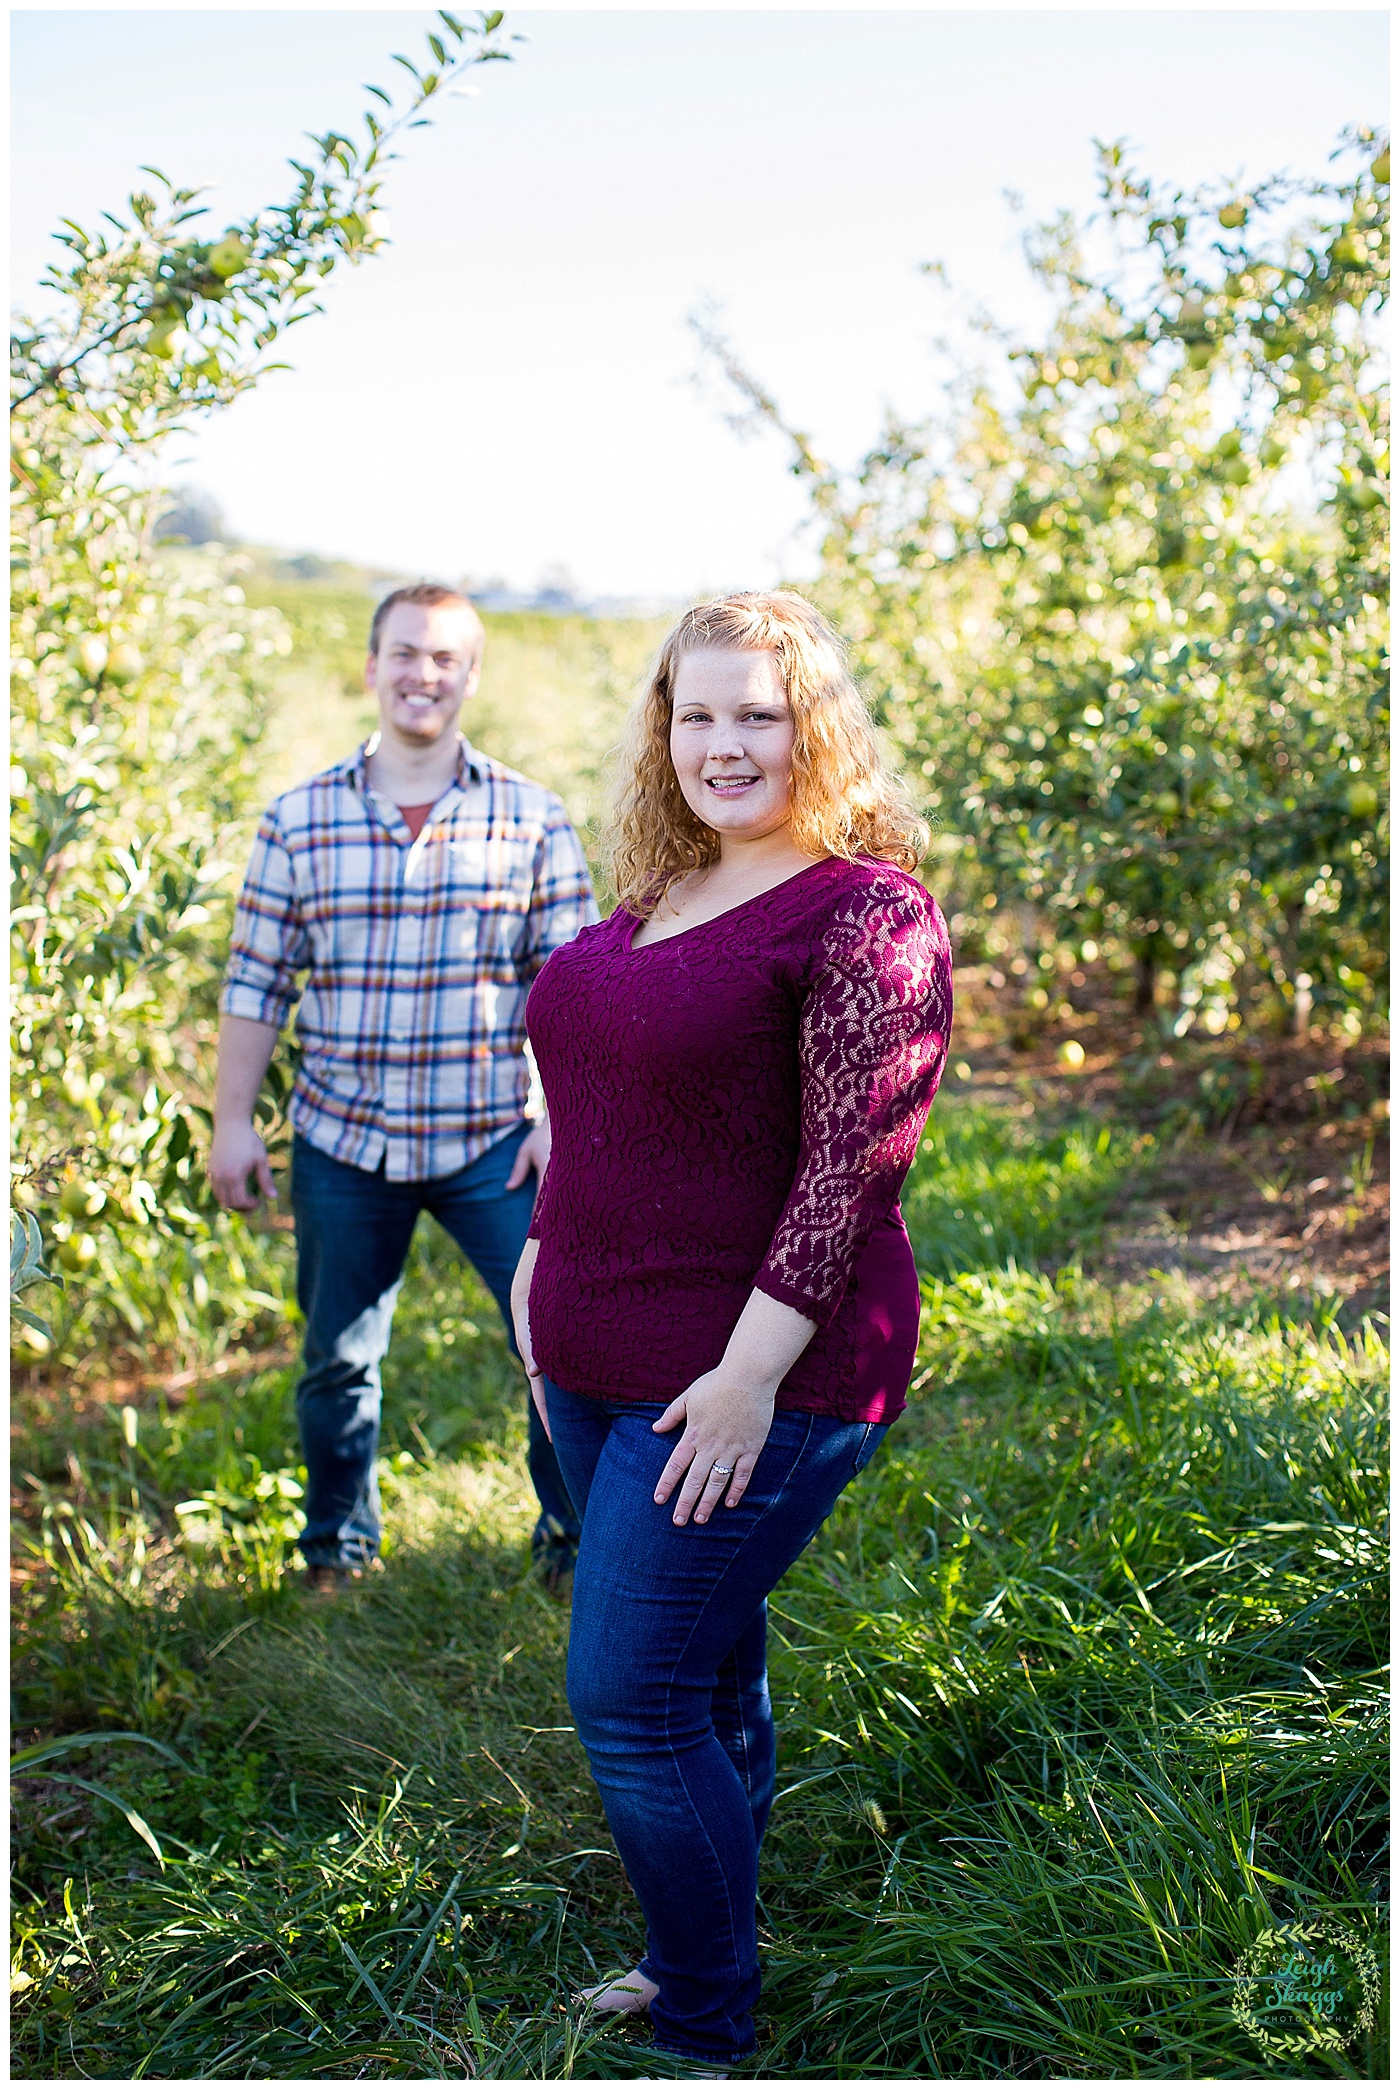 Katie and Matt are Engaged!!  A Carter Mountain Orchard Engagement session in Charlottesville Virginia!